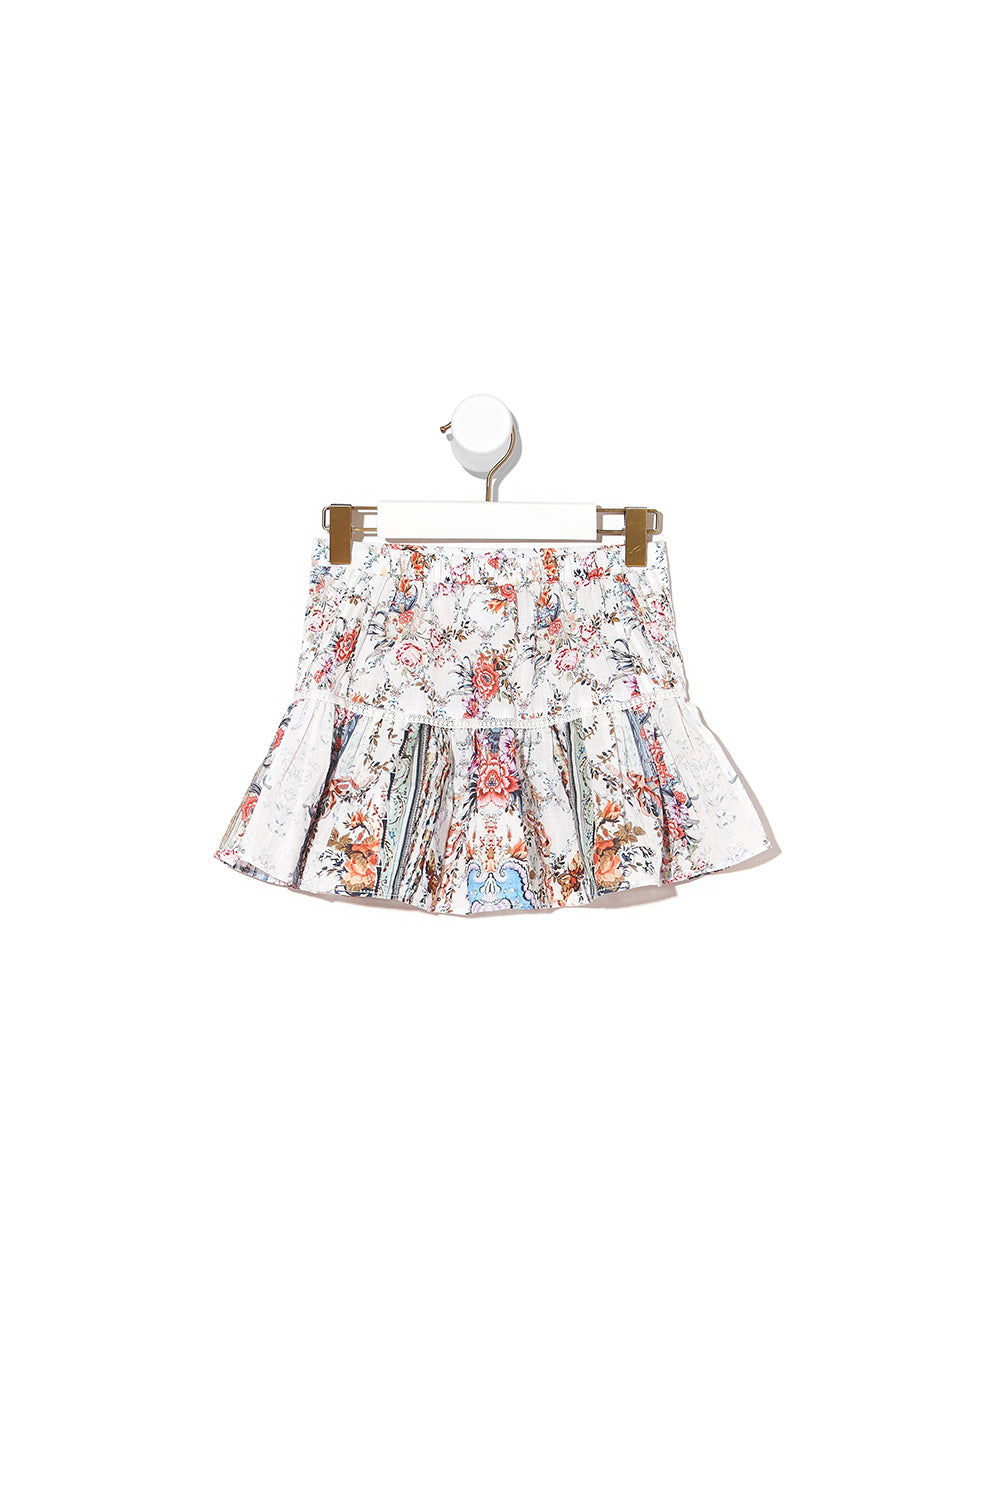 KIDS' SKIRT WITH PINTUCKING SOUTHERN BELLE